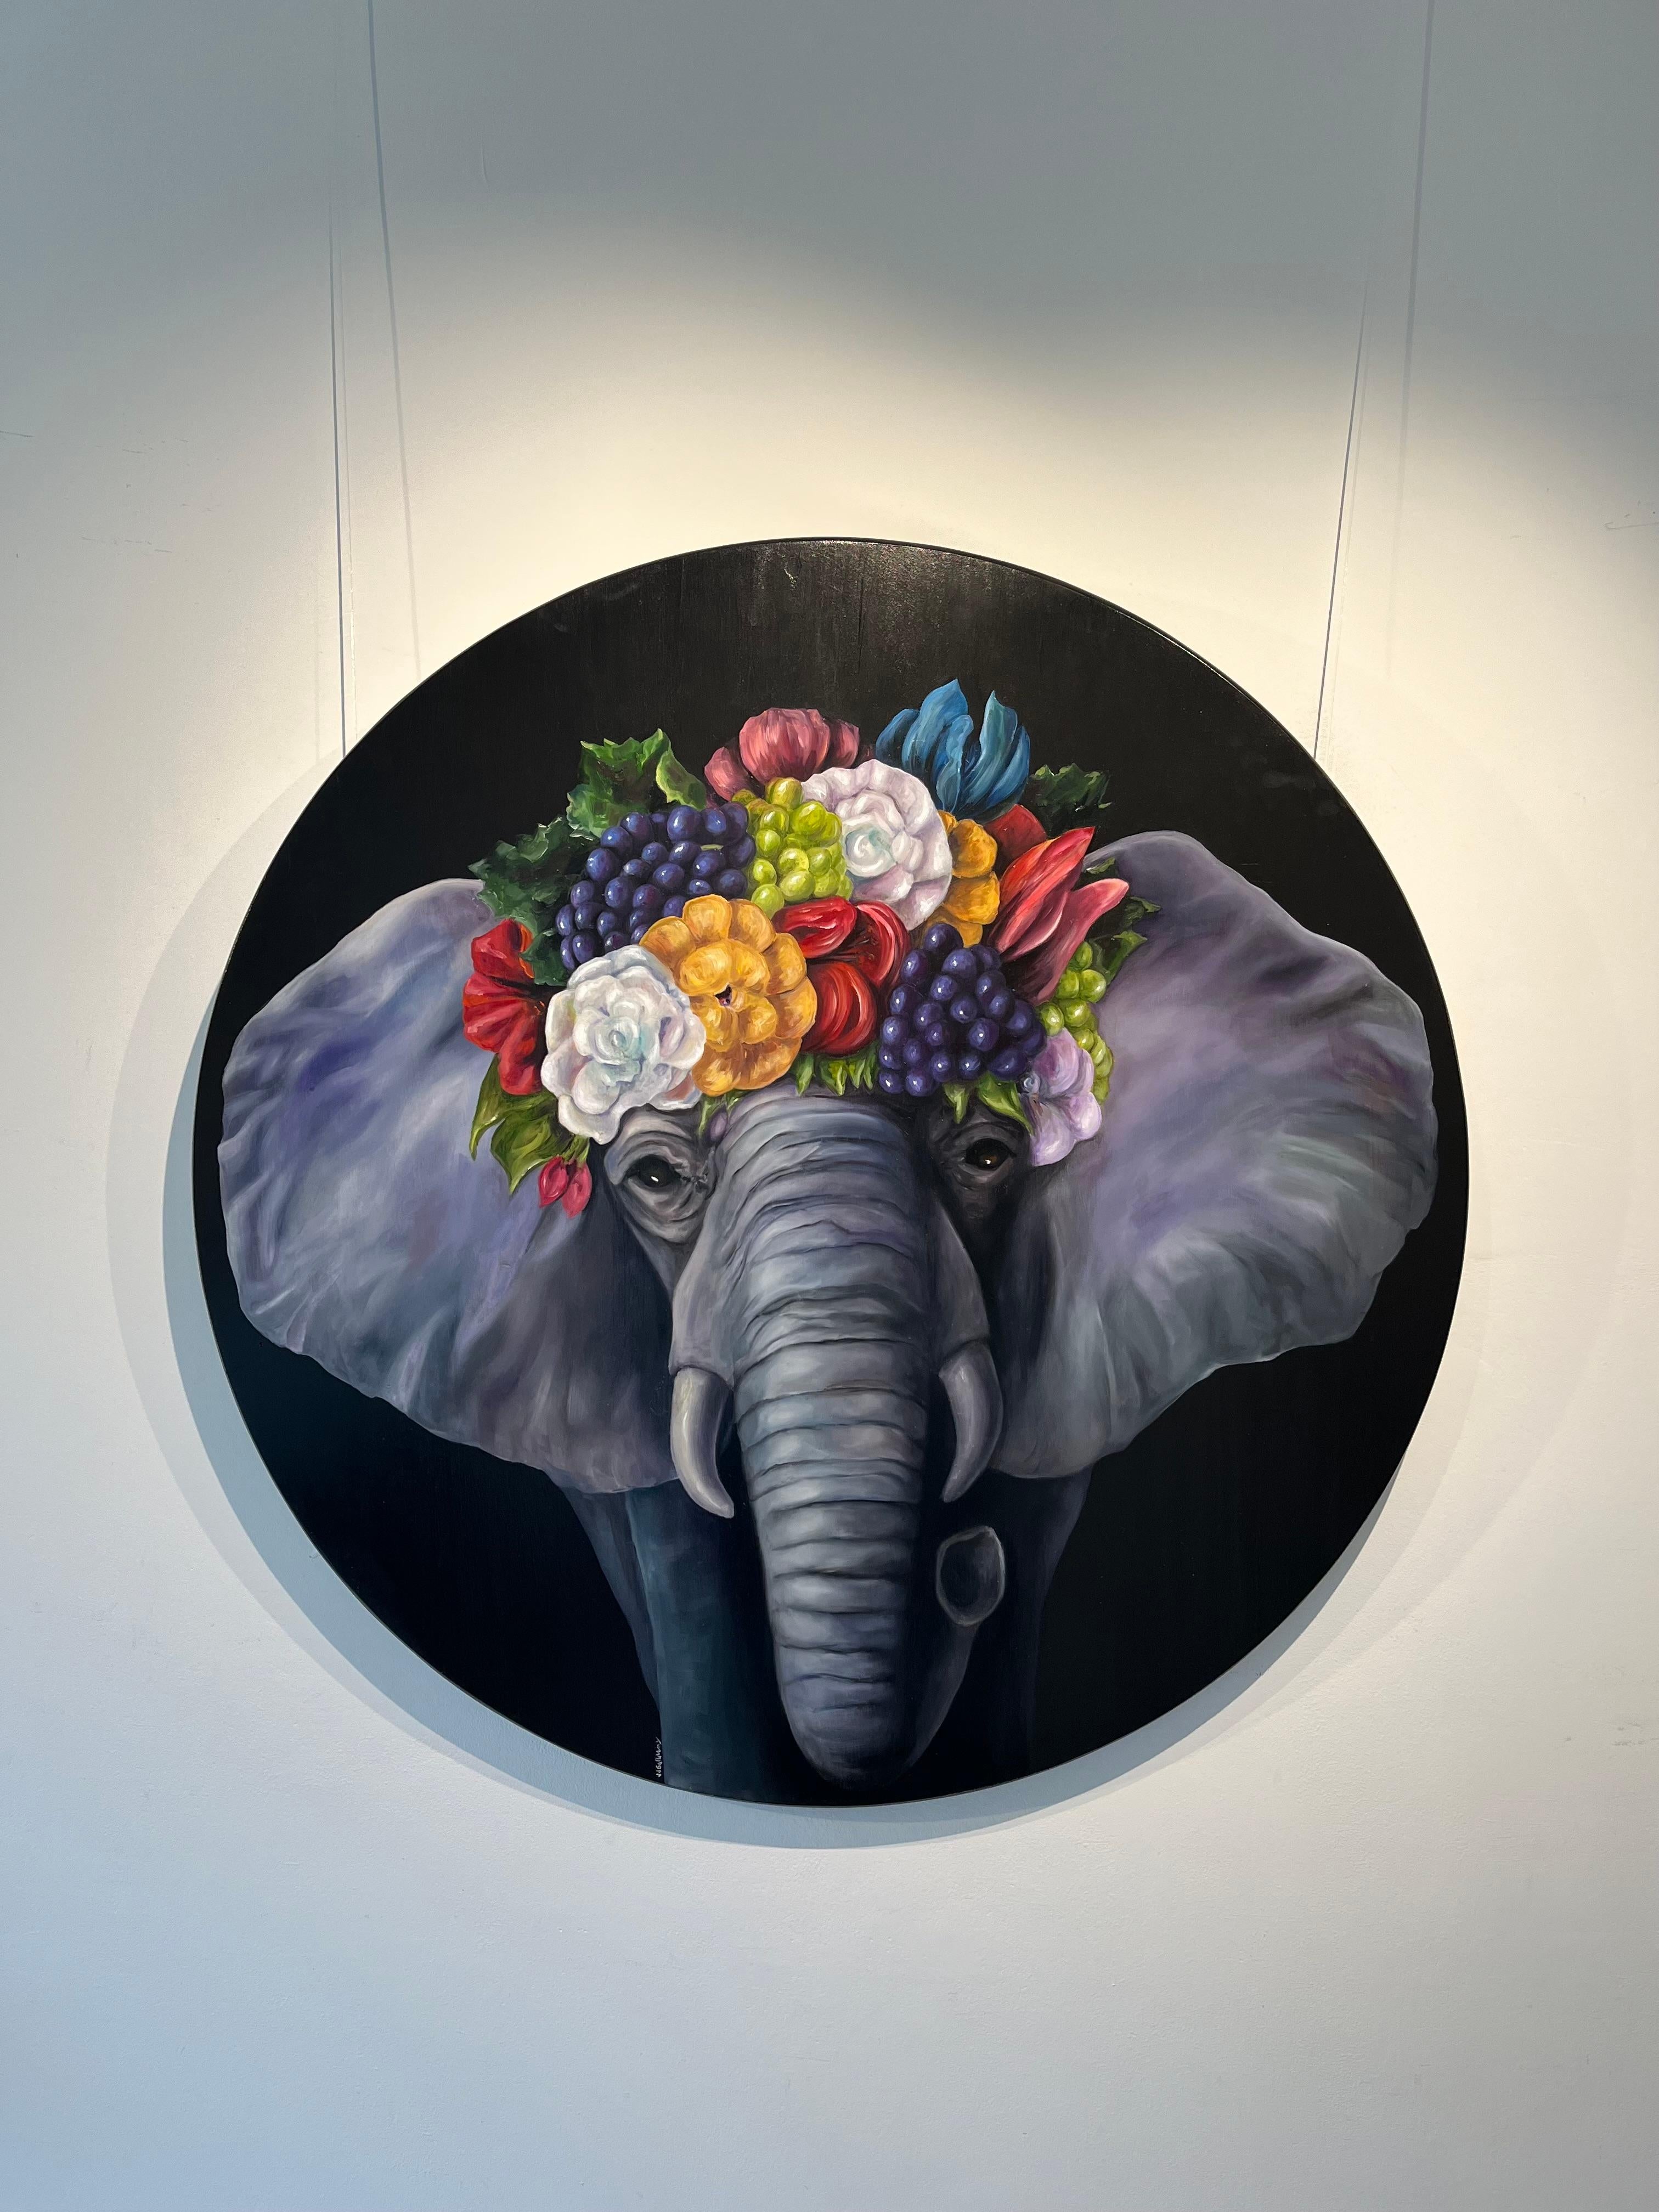 
I wanted to make sure the elephant in this piece was coming forward out of the dusk. With the deep colours in the flower crown and the elephants body I was able to lose some of the hard edges in places. Before I turned to art full time in 2000, I